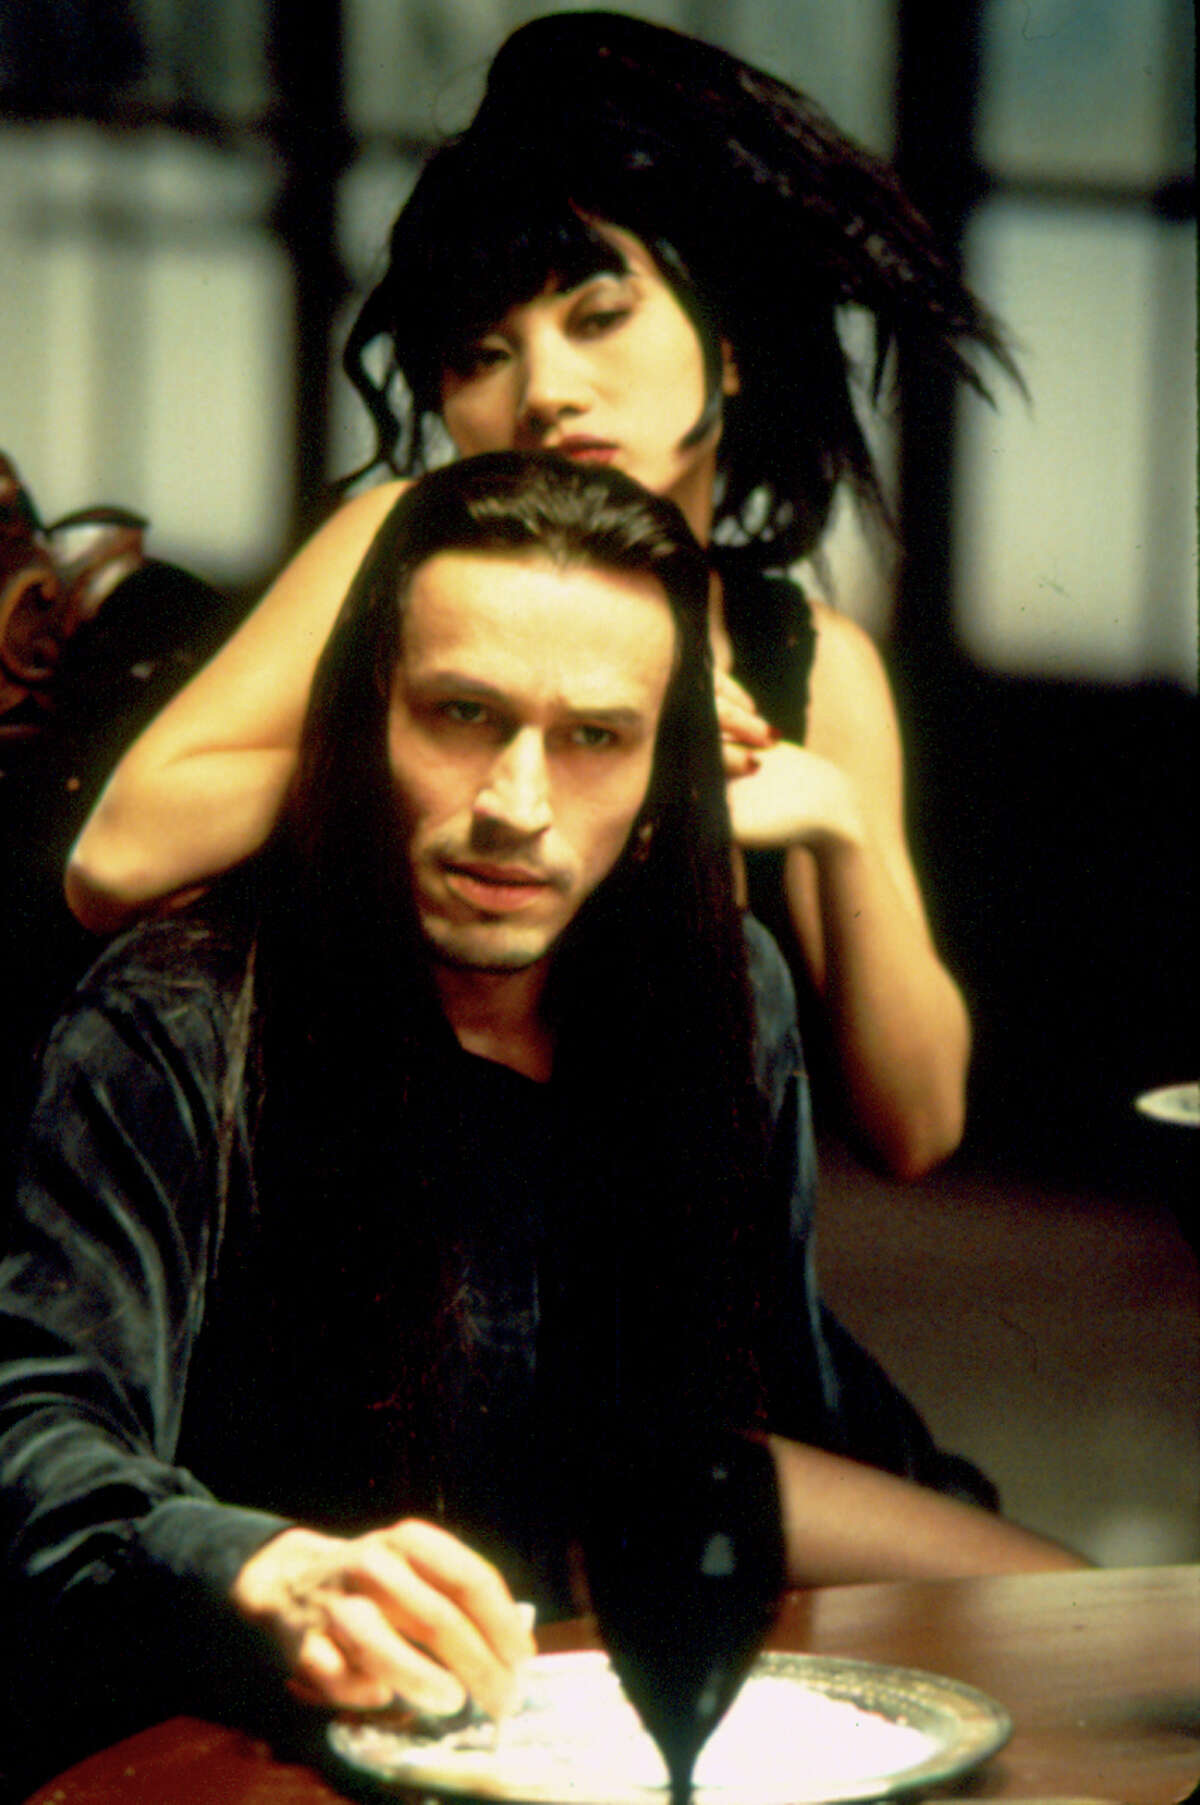 Top Dollar The Crow: 1994 Played by: Michael Wincott Best line: “Dad gave me this. Fifth birthday. He said, ‘Childhood's over the moment you know you're gonna die.’"